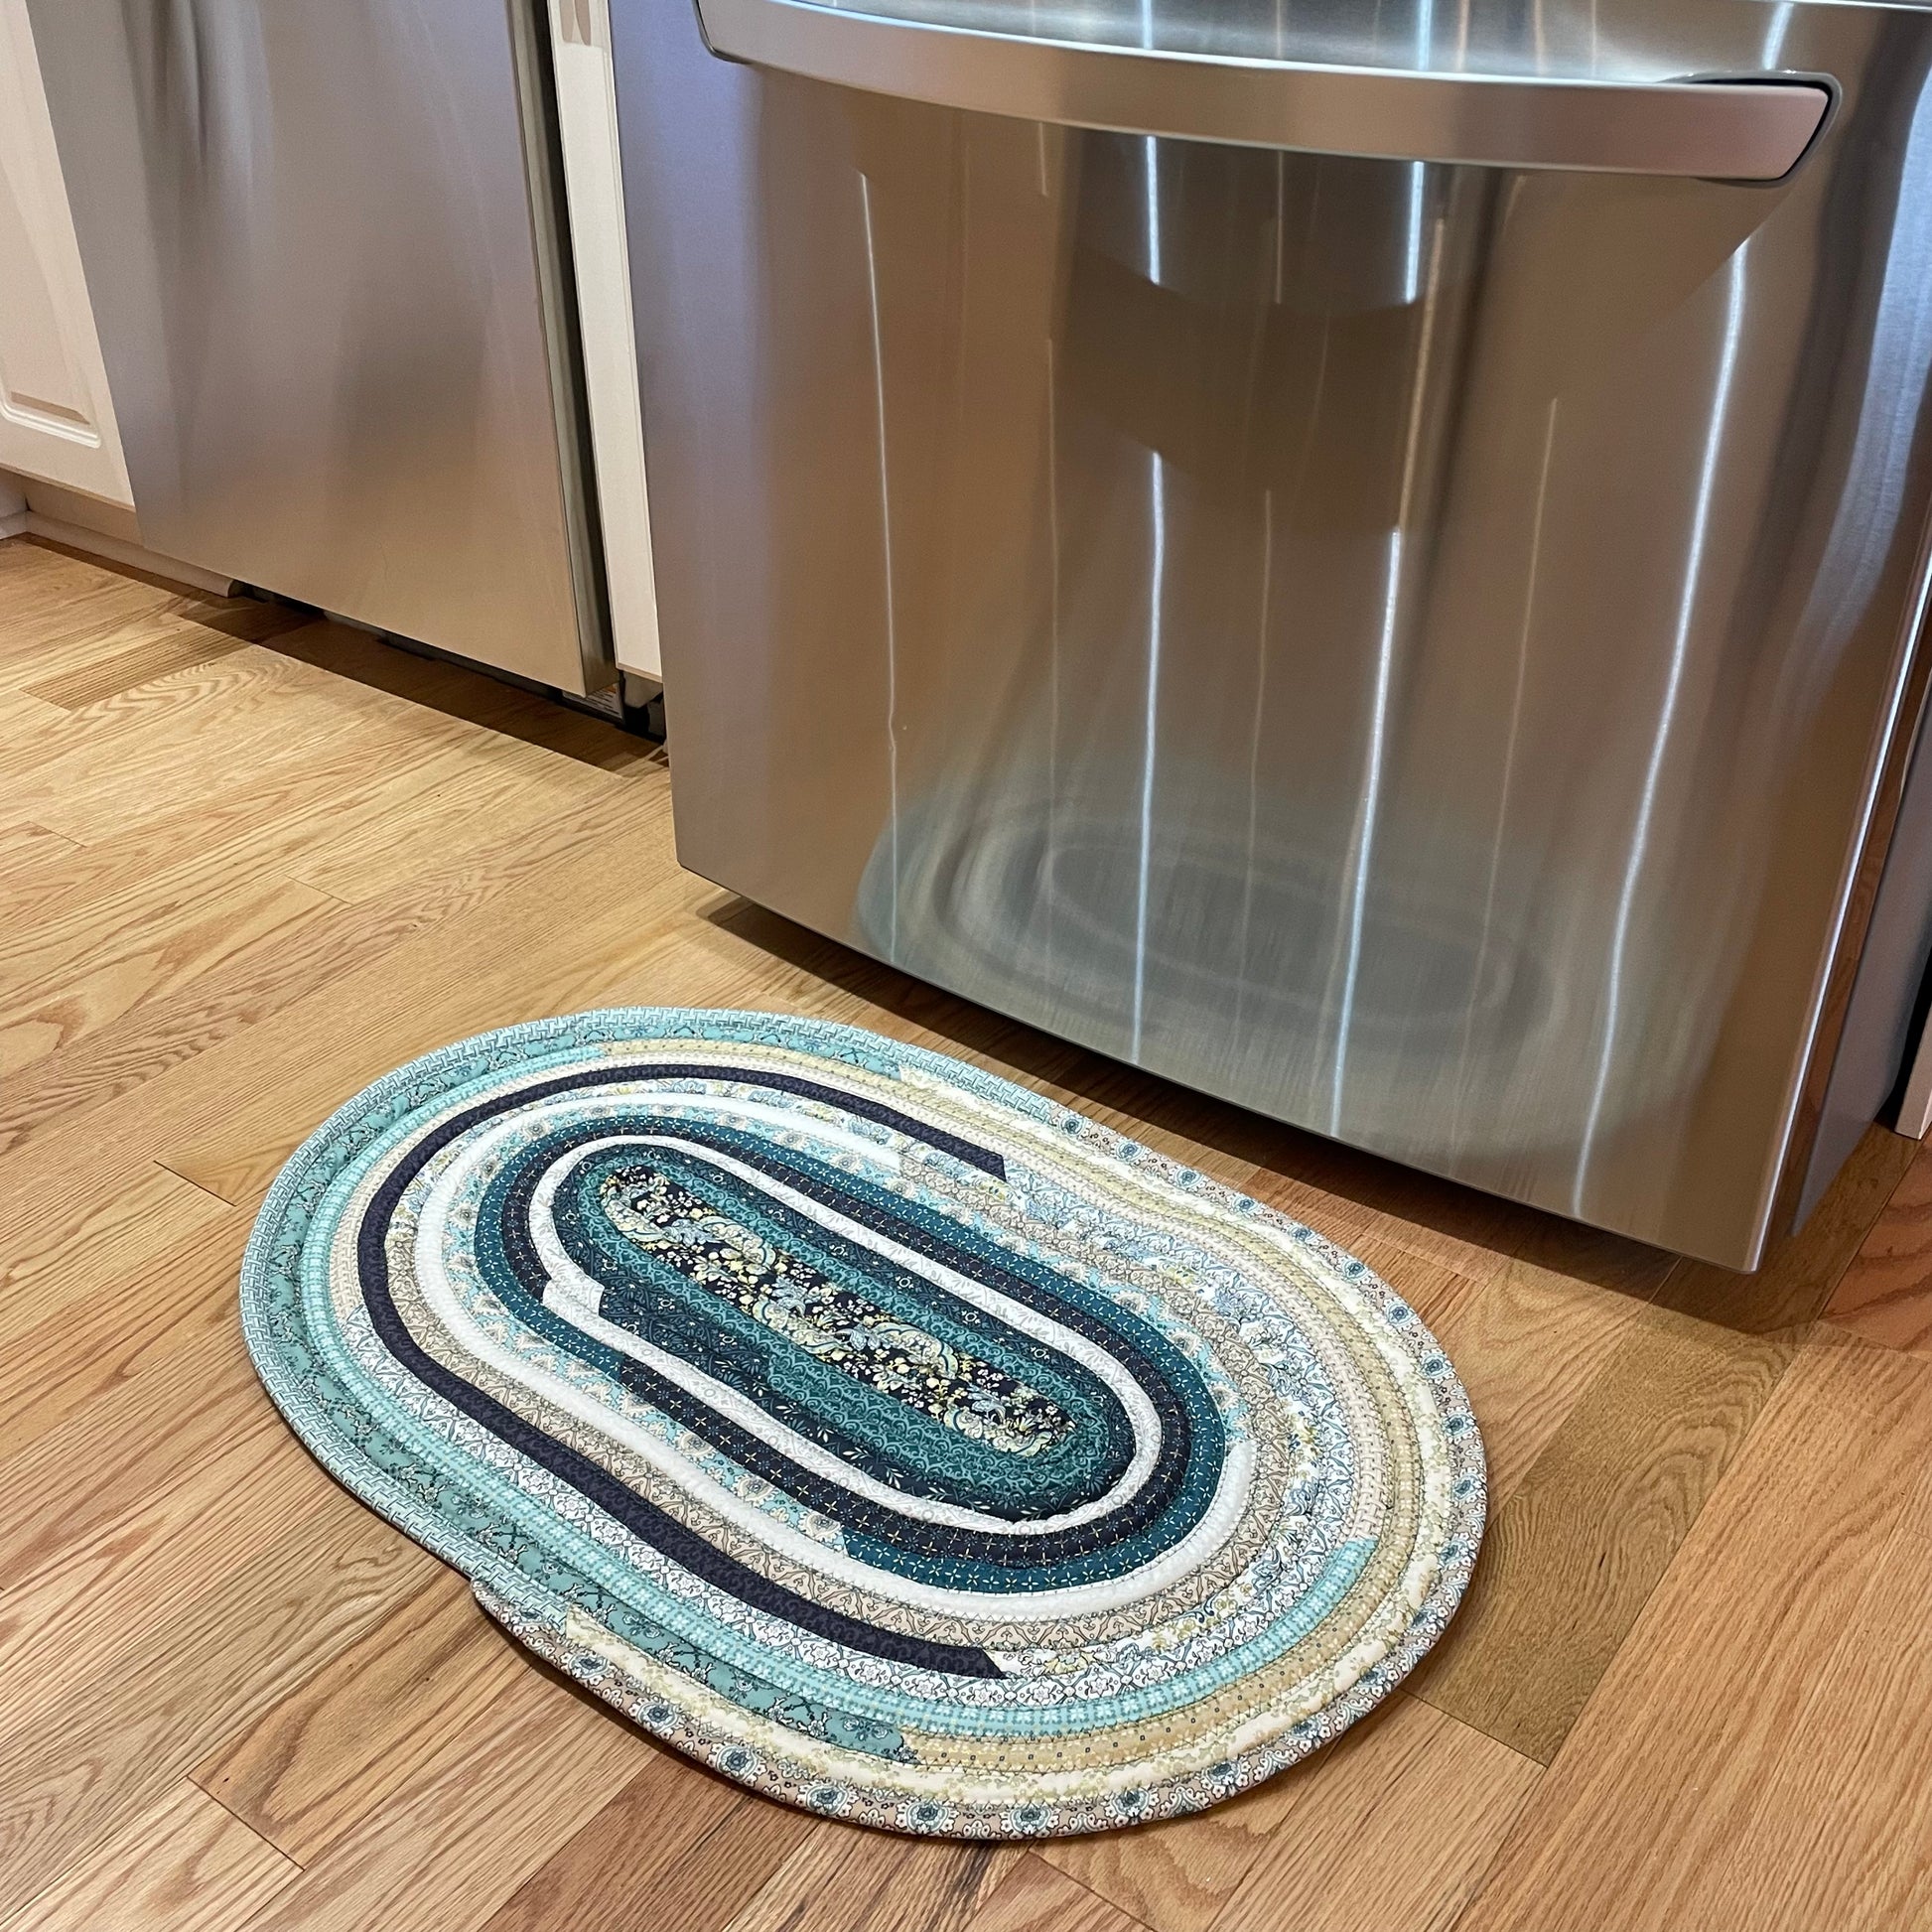 Farmhouse Kitchen Rug, Handmade Washable Kitchen Rug. Otherwise known as a Jelly Roll Rug our rugs are handmade in Canada.